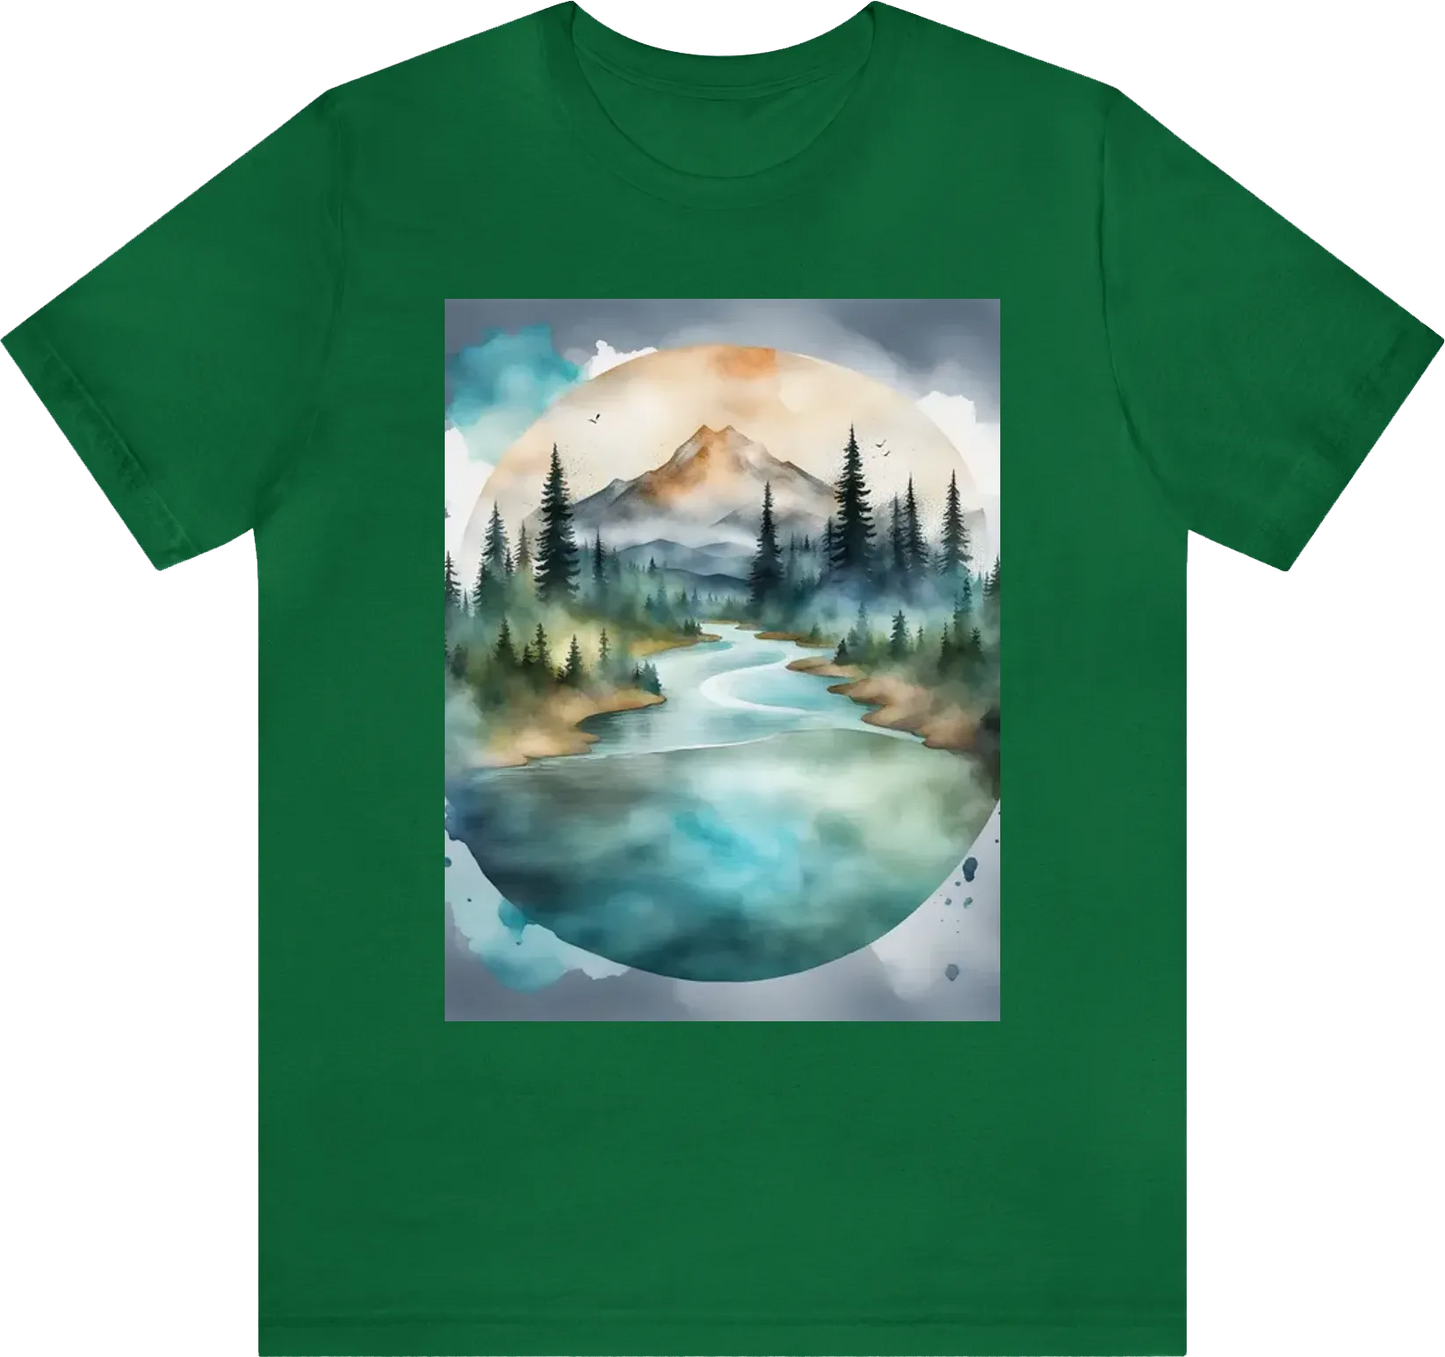 Double exposure of a river, natural scenery, watercolor art, tshirt design, text: "Adventure Awaits"